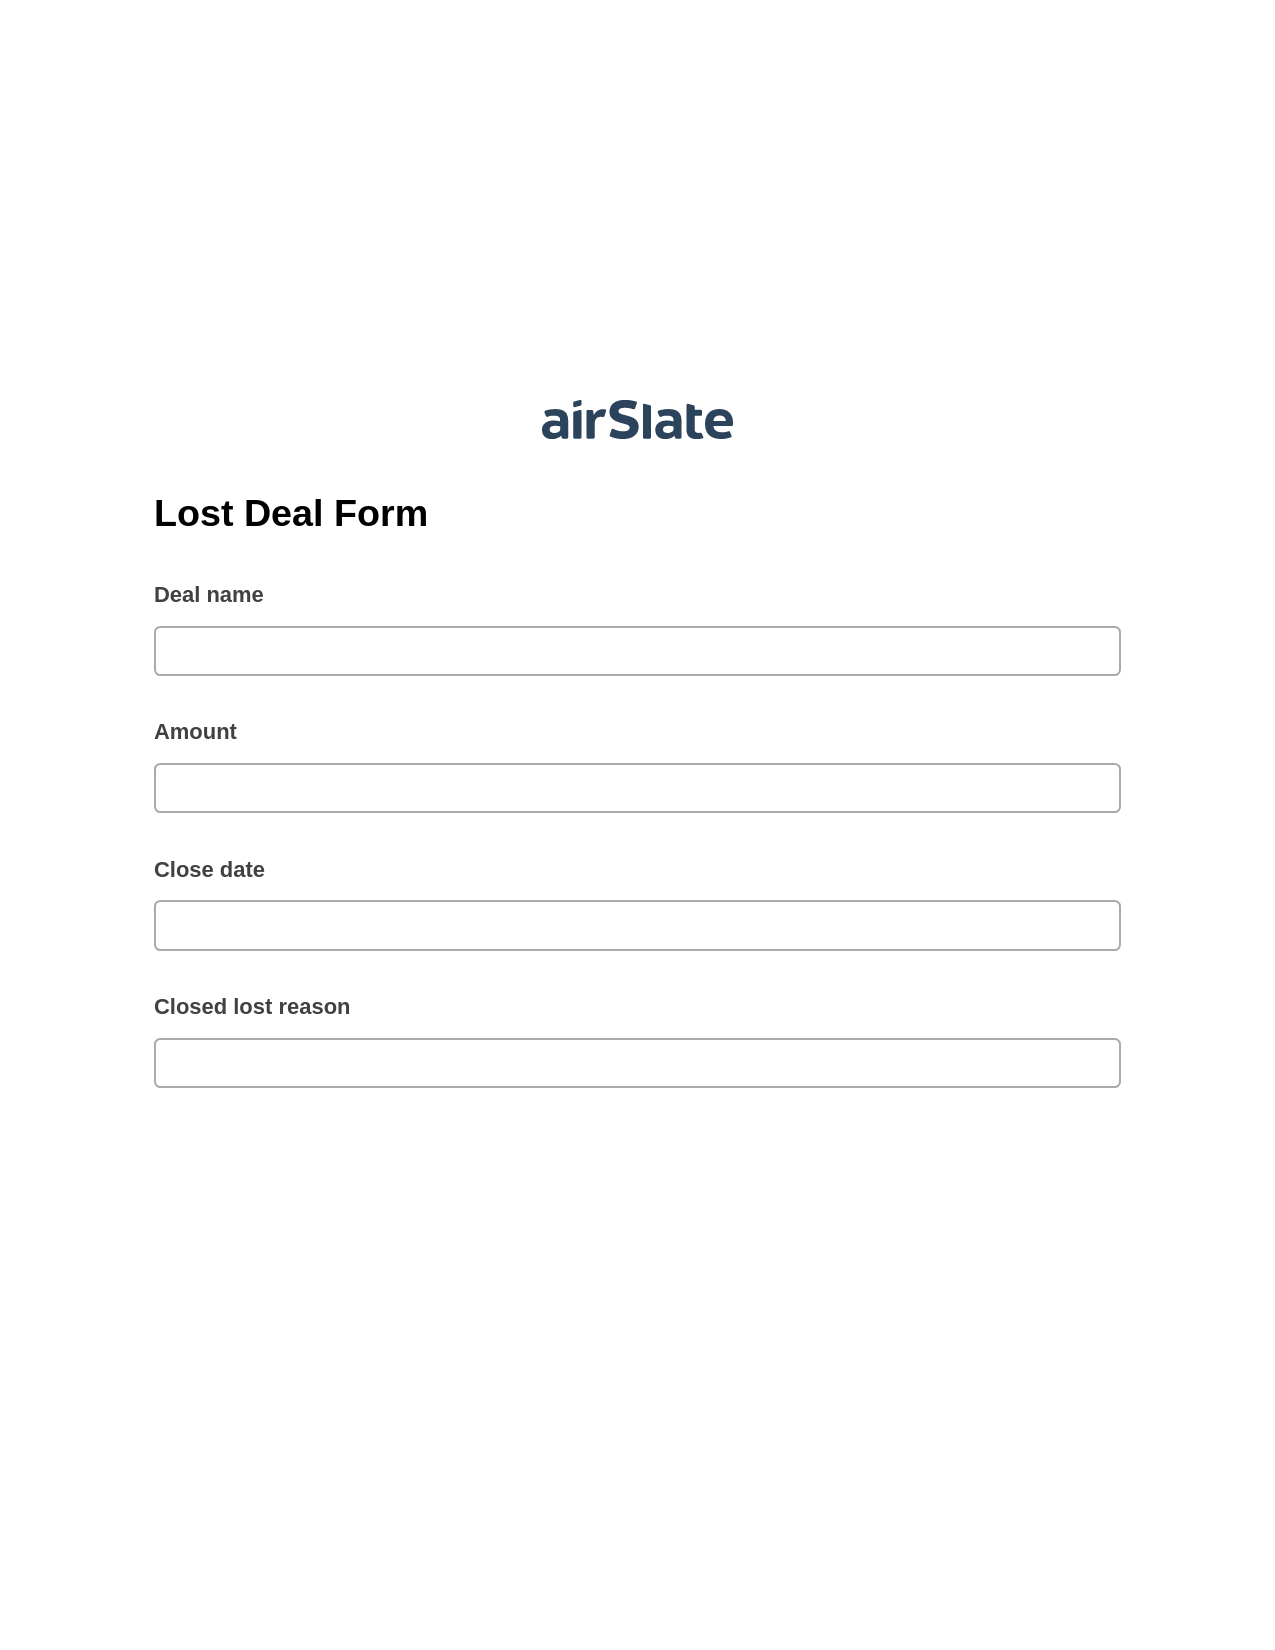 Lost Deal Form Prefill from NetSuite records, Webhook Bot, Export to Smartsheet